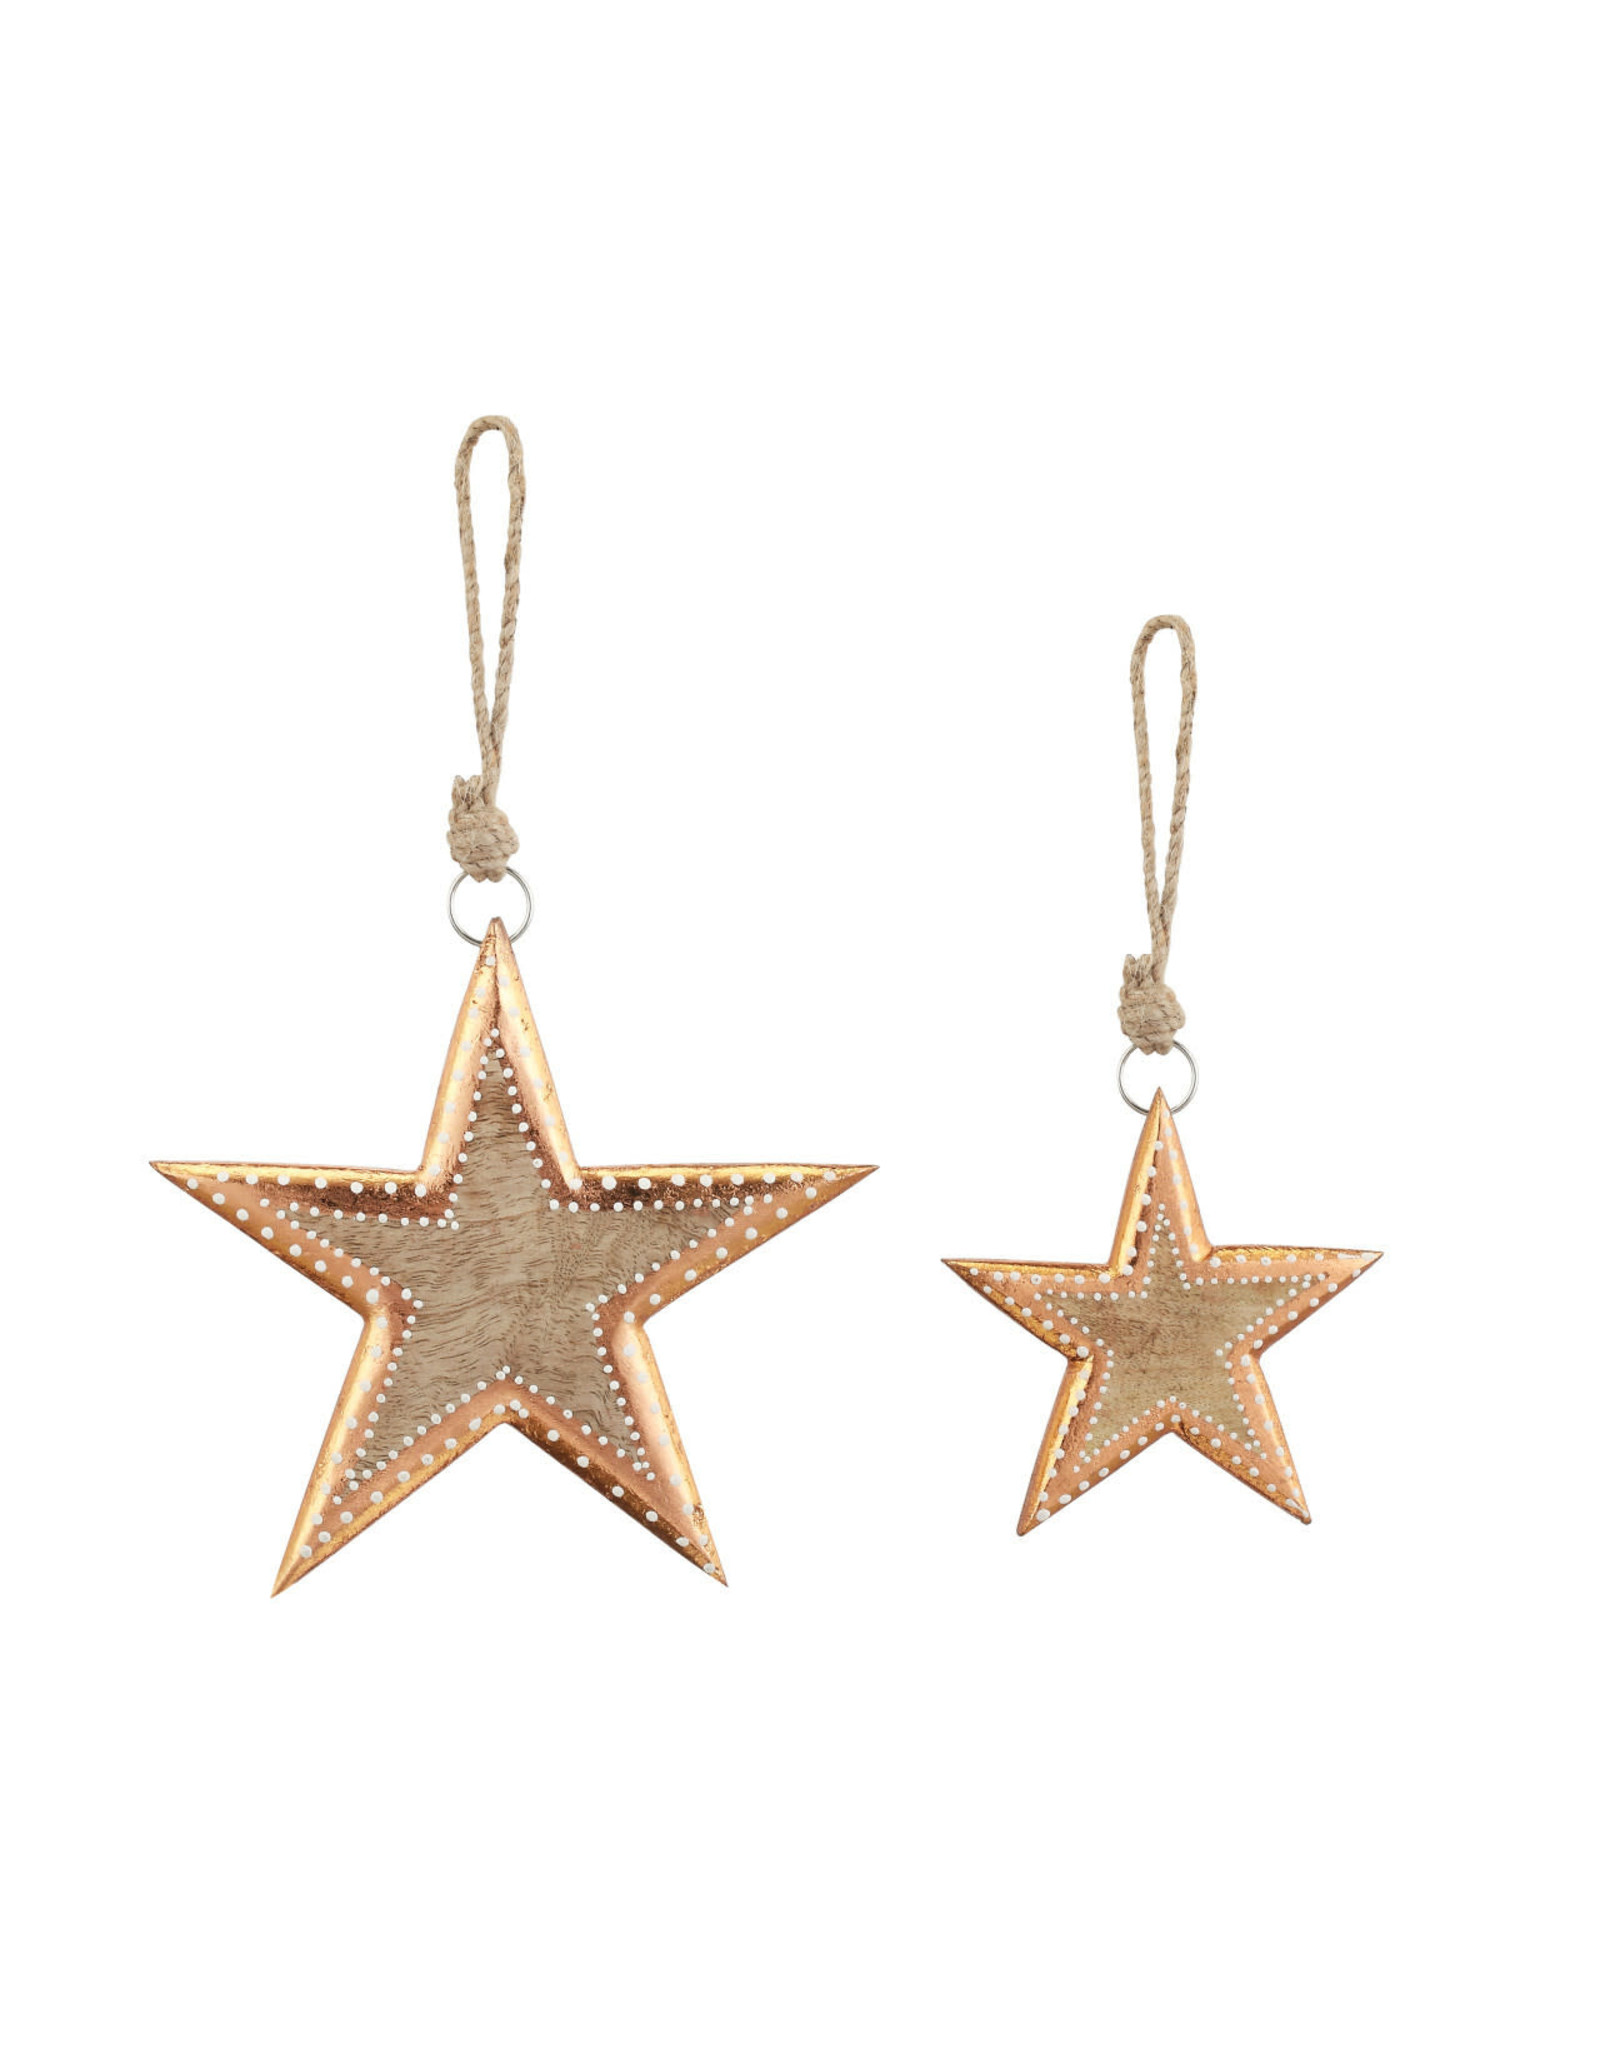 Demdaco Ornaments - Wood Star with Copper Finish (Set of 2)